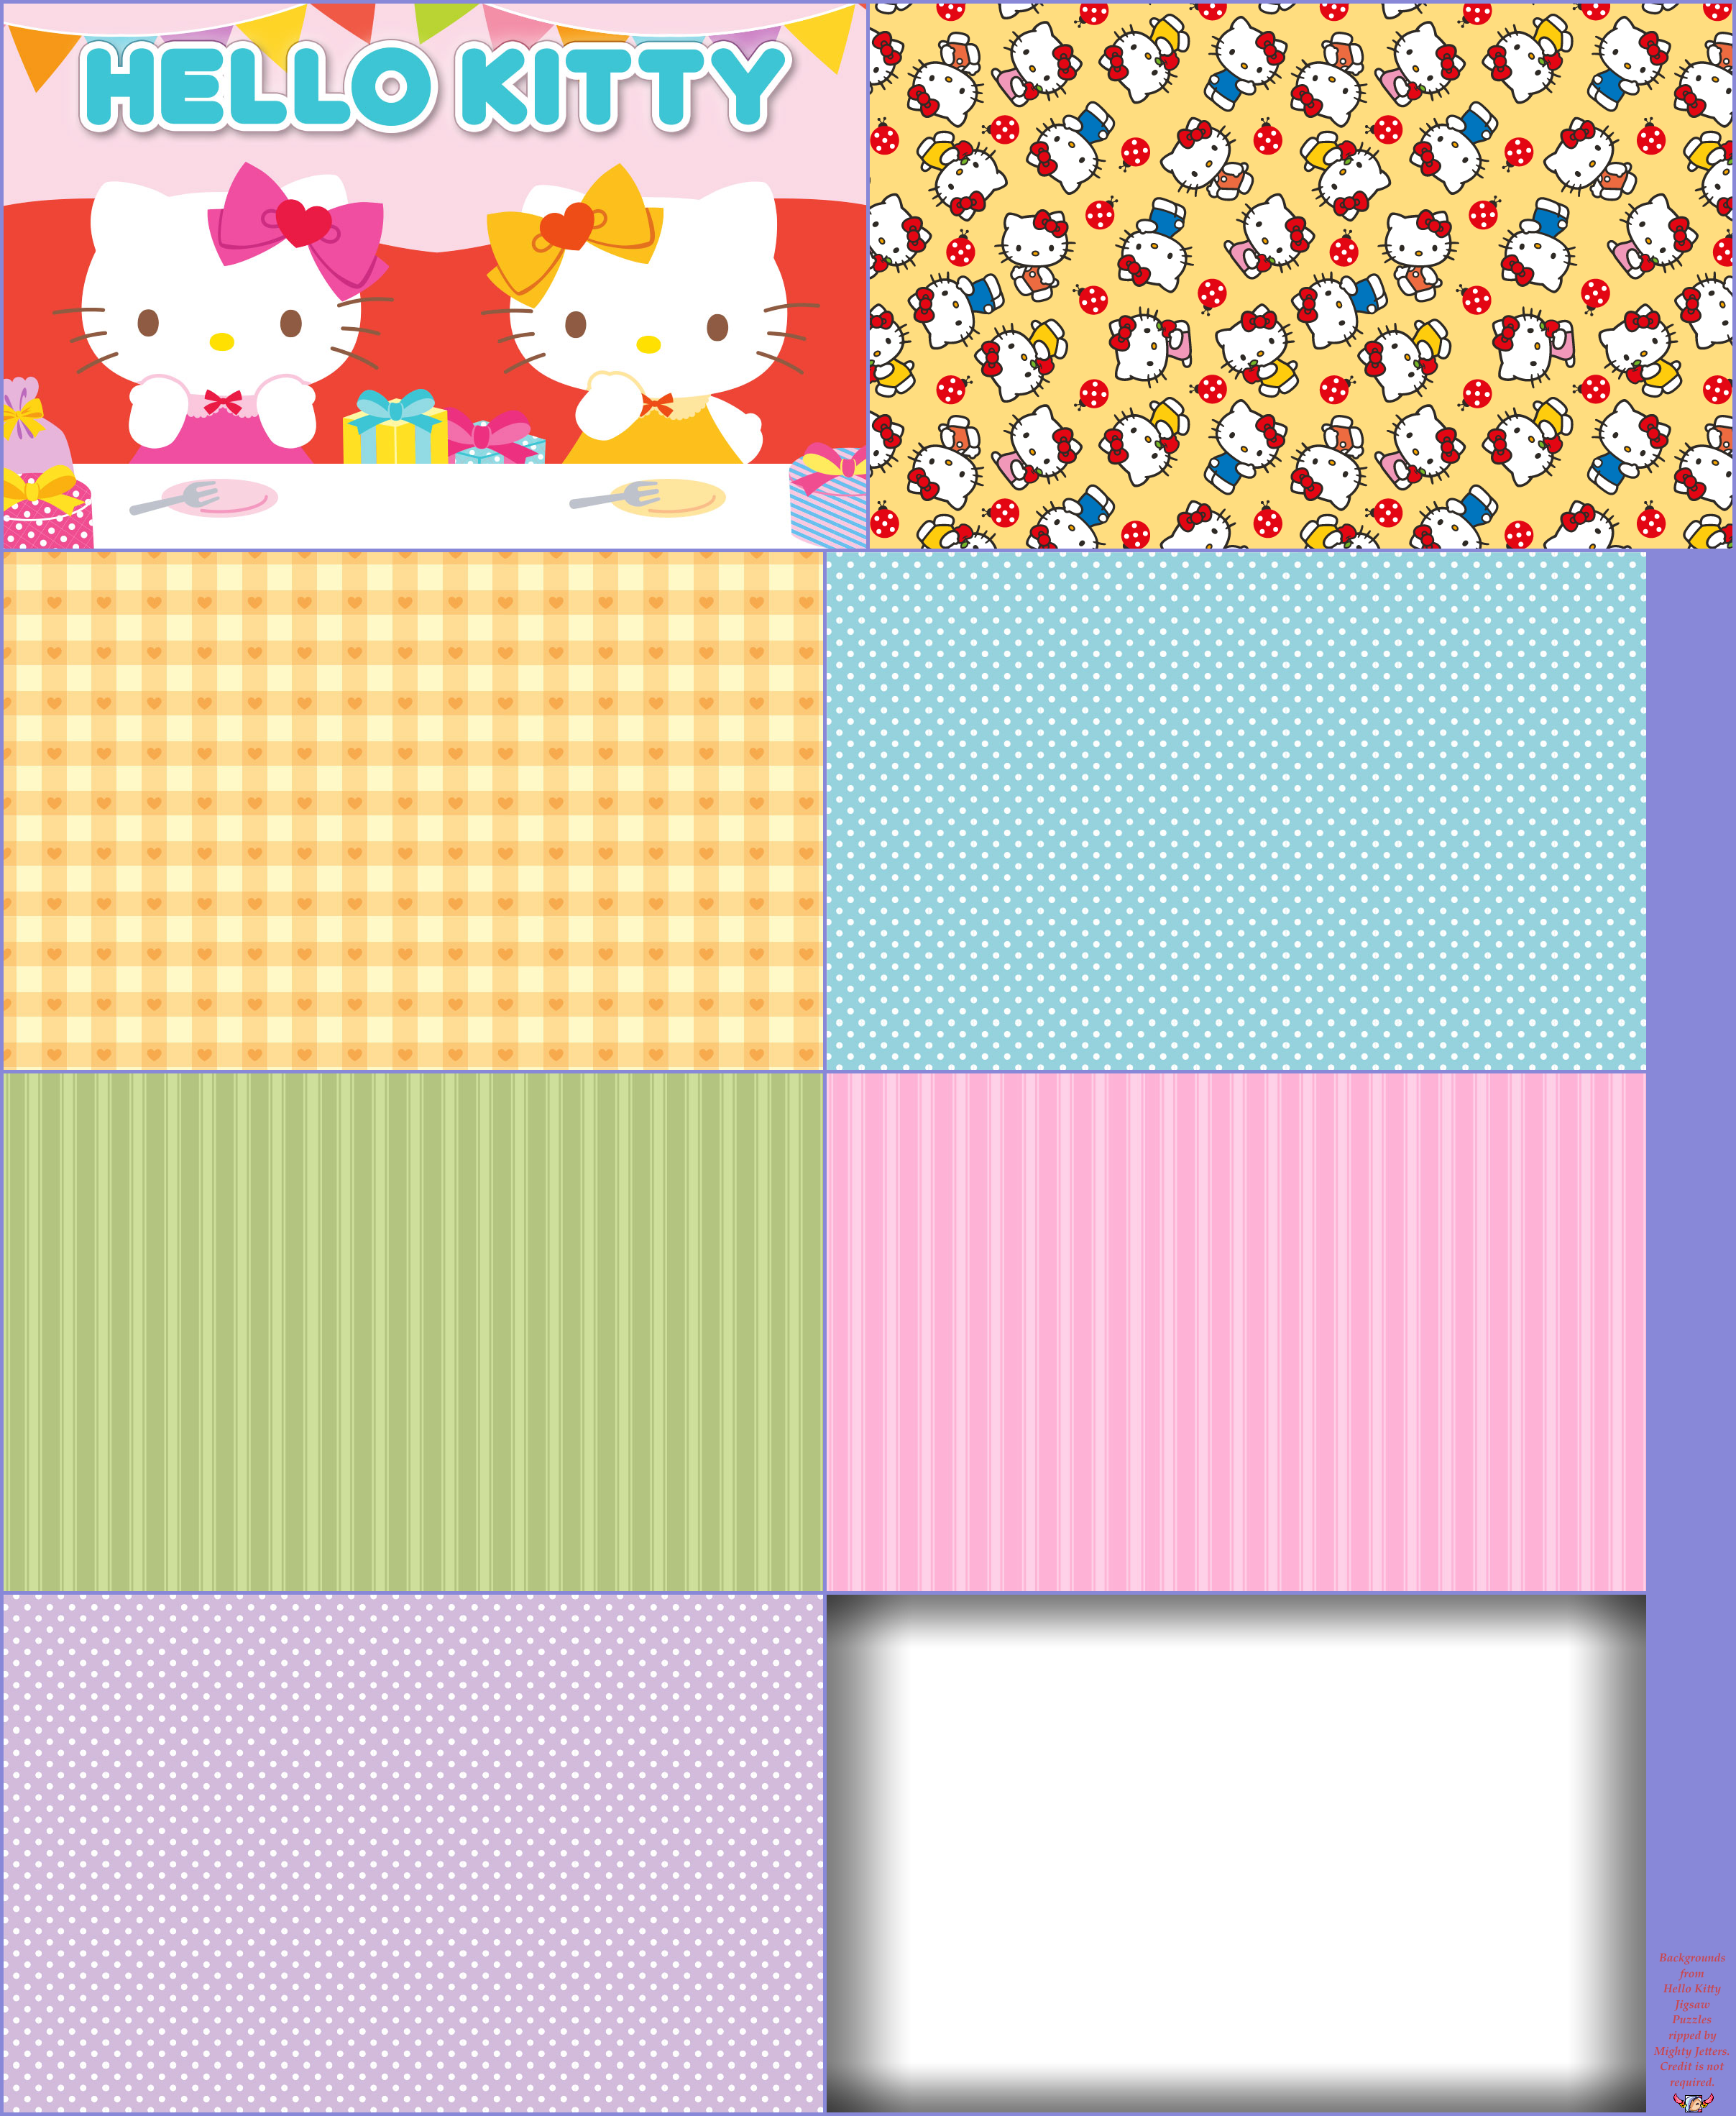 Hello Kitty Jigsaw Puzzles - Backgrounds